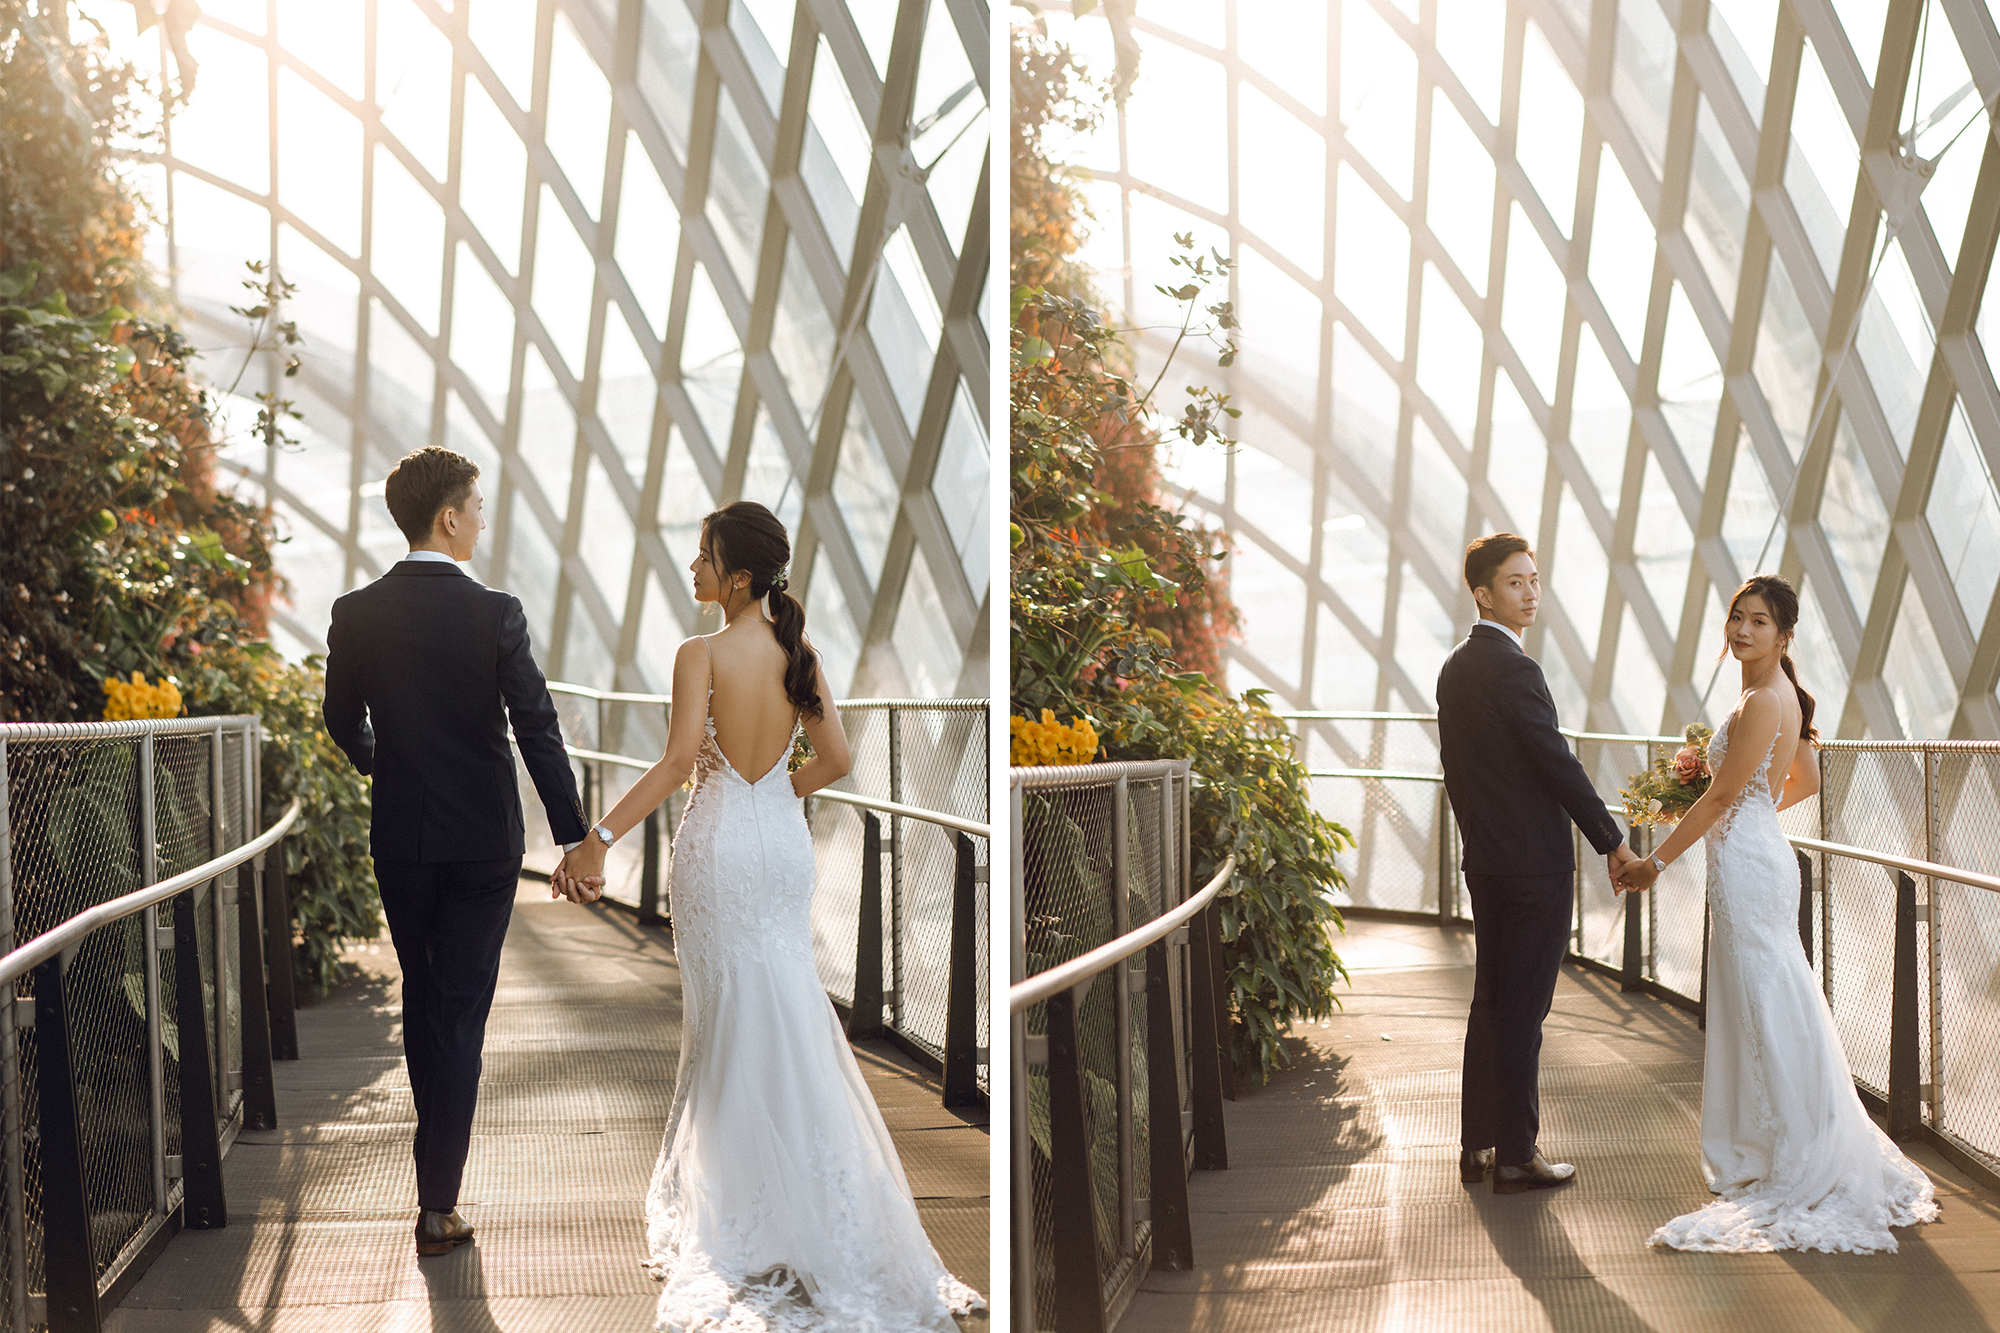 Sunset Prewedding Photoshoot At Cloud Forest, Gardens By The Bay  by Samantha on OneThreeOneFour 25